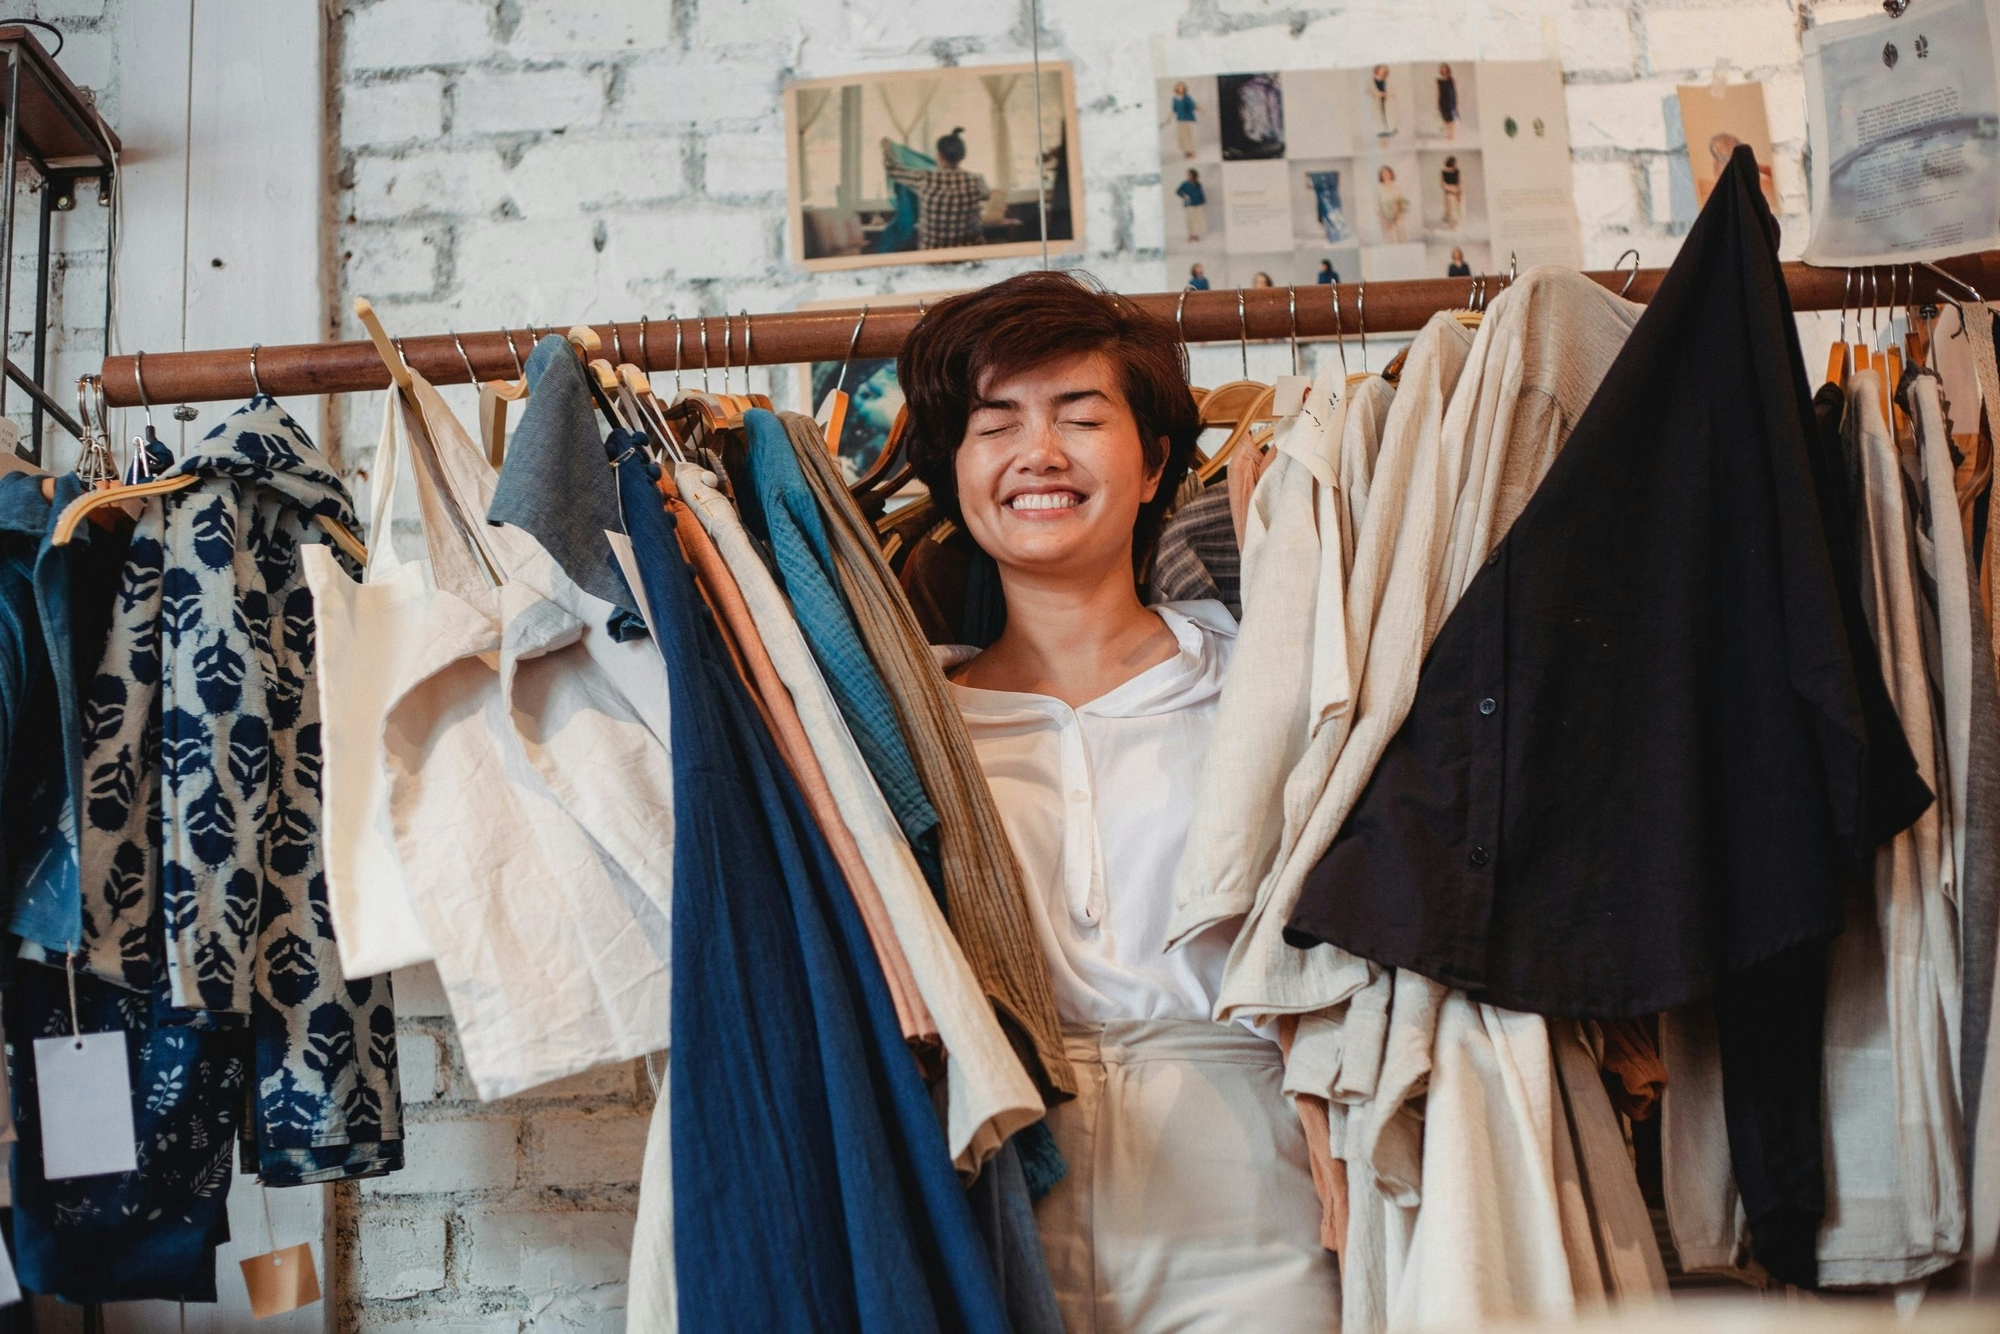 7 Alternative Careers for Retail Managers